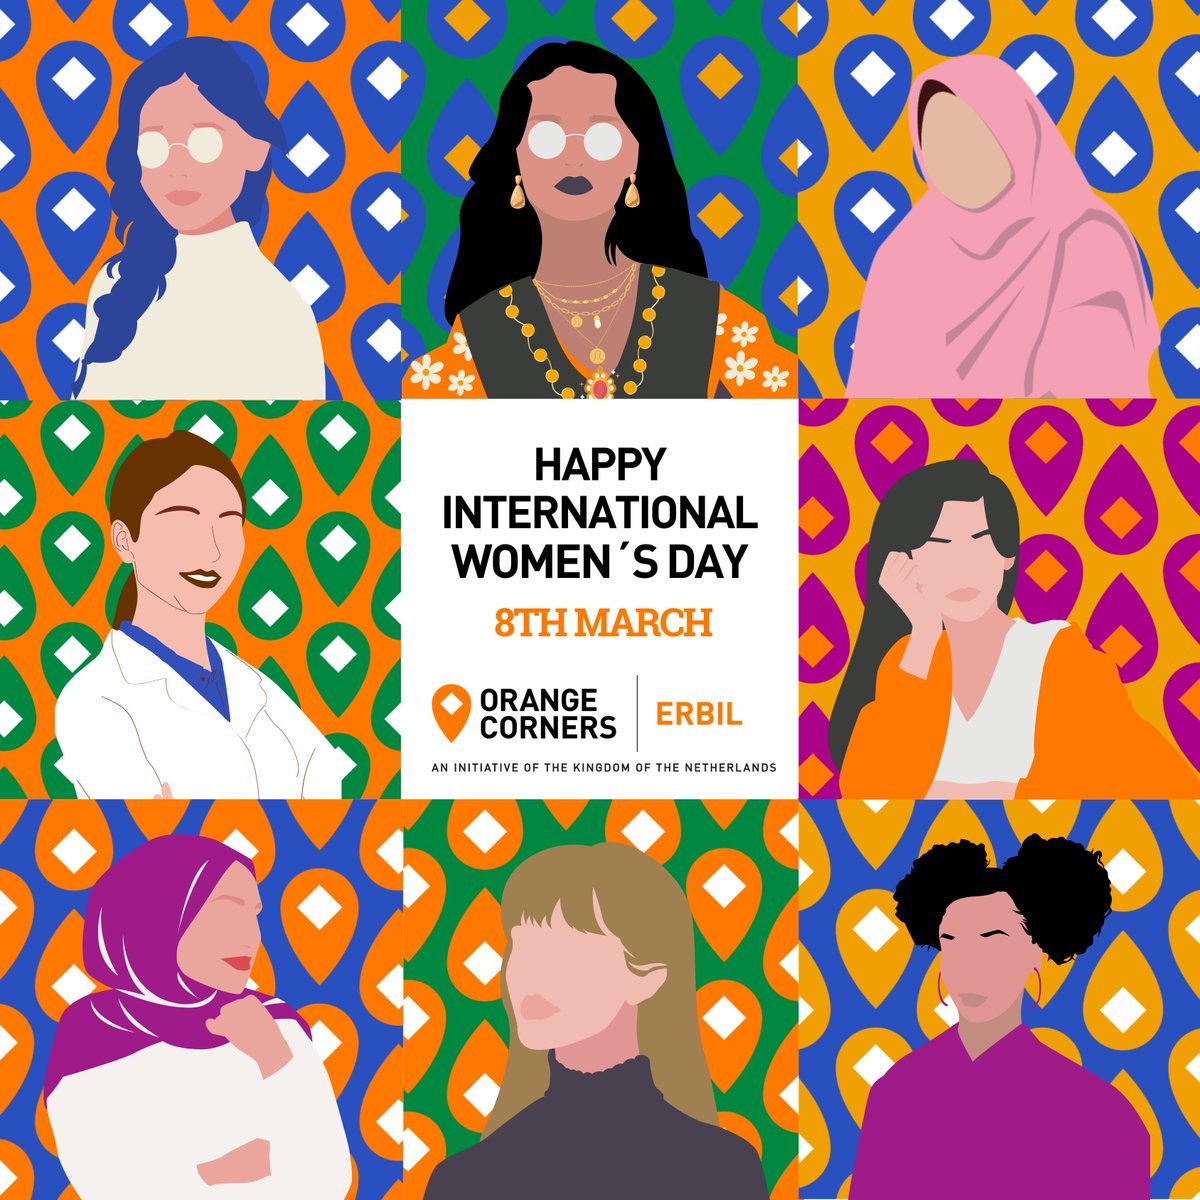 Women are the cornerstone of healthy societies, and they should be empowered today and every day! Happy International Women’s Day from Orange Corners - Erbil! #IWD2024 #WomenEntrepreneurs #OrangeCorners'